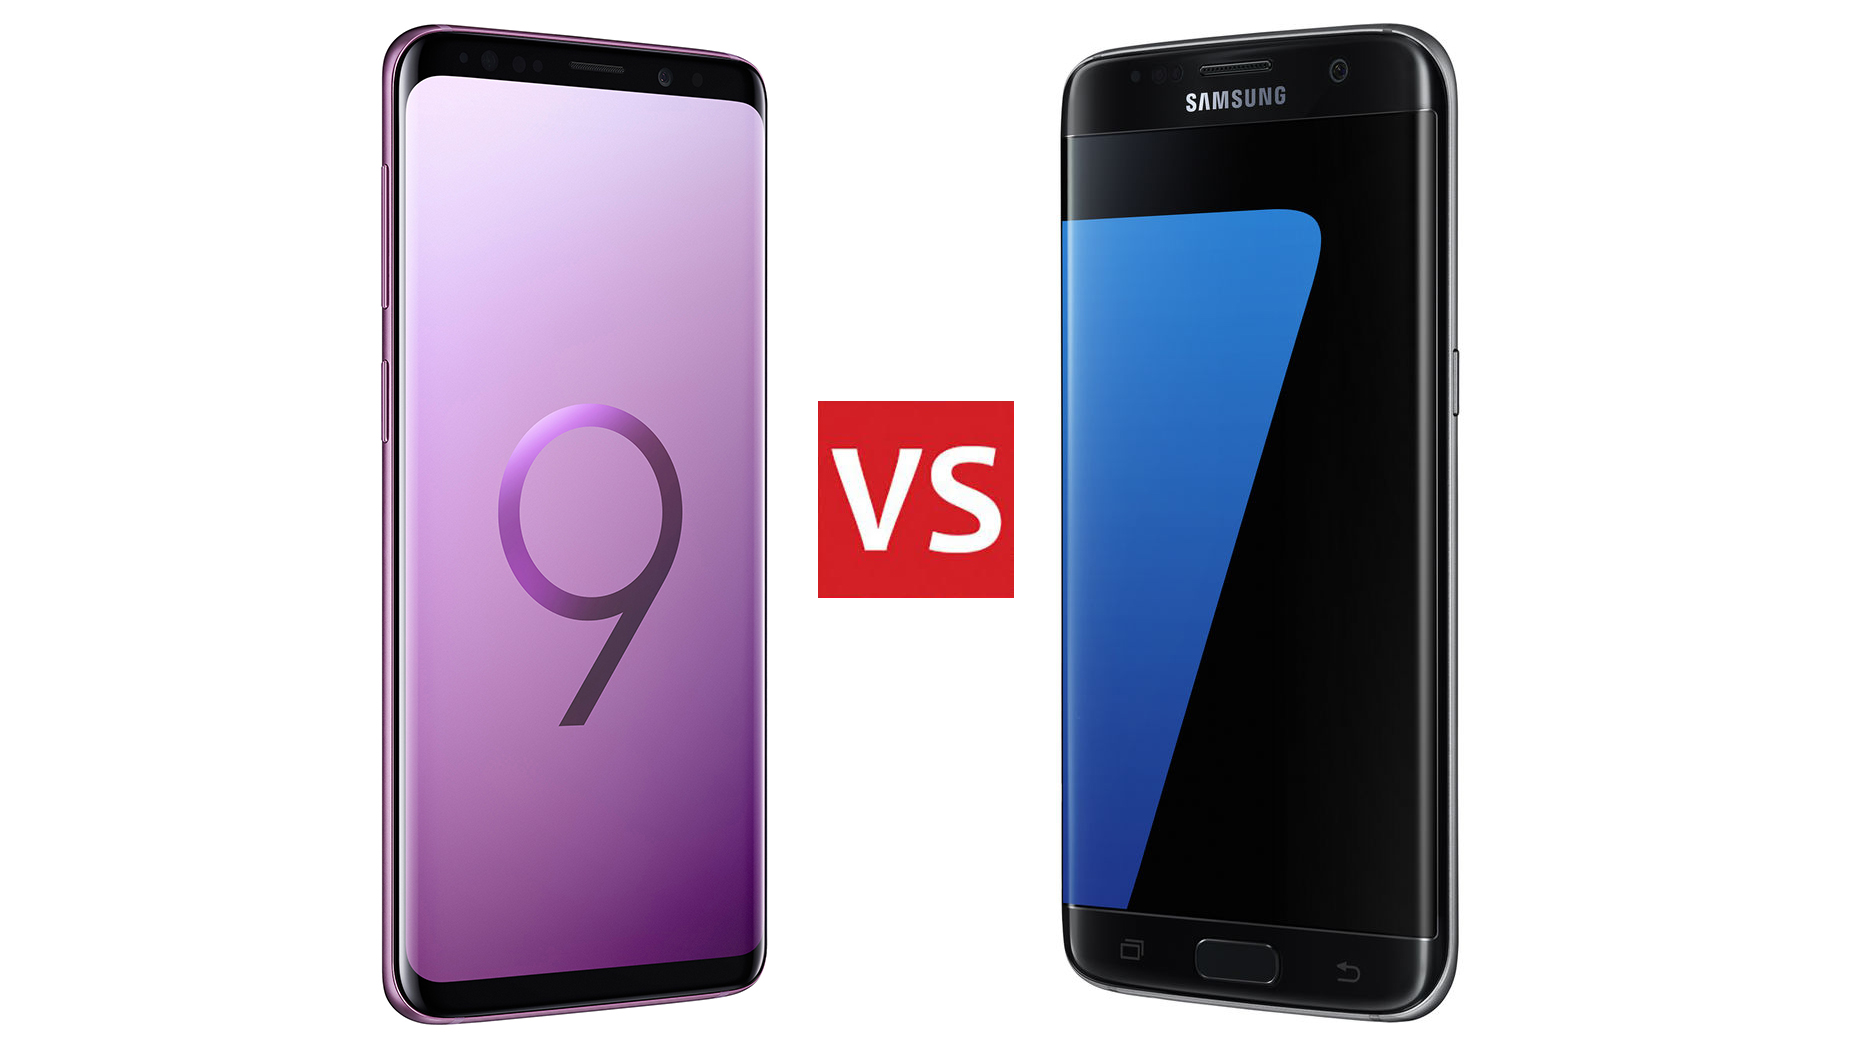 Samsung Galaxy S9 Vs Samsung Galaxy S7 Is This The 2 Year Upgrade You Ve Been Waiting For T3